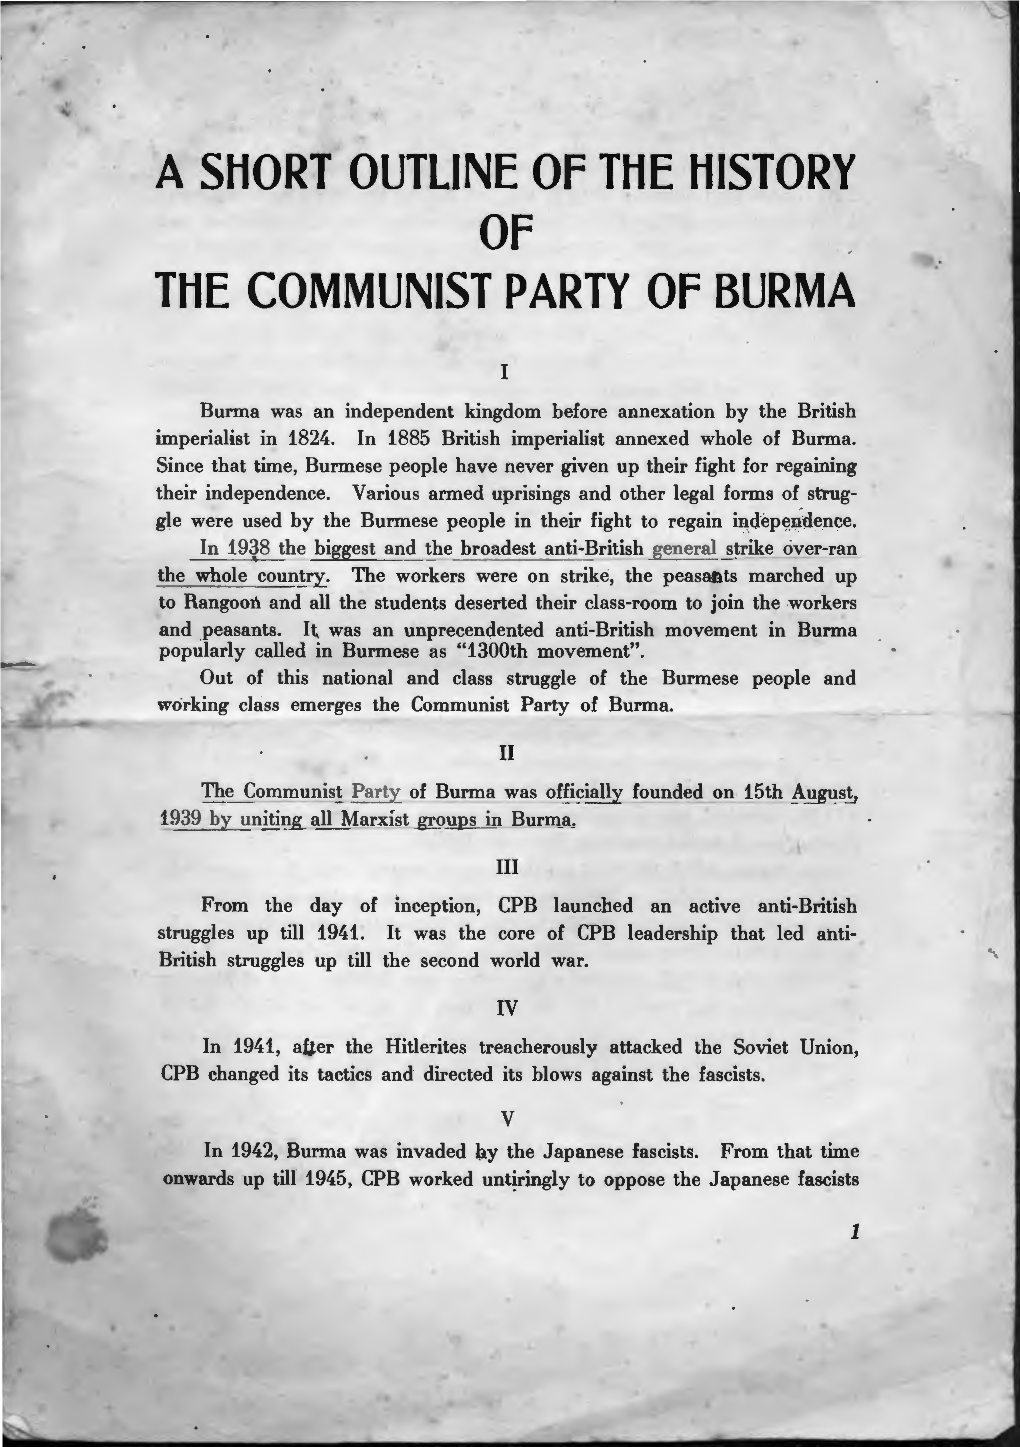 A Short Outline of the History of the Communist Party of Burma